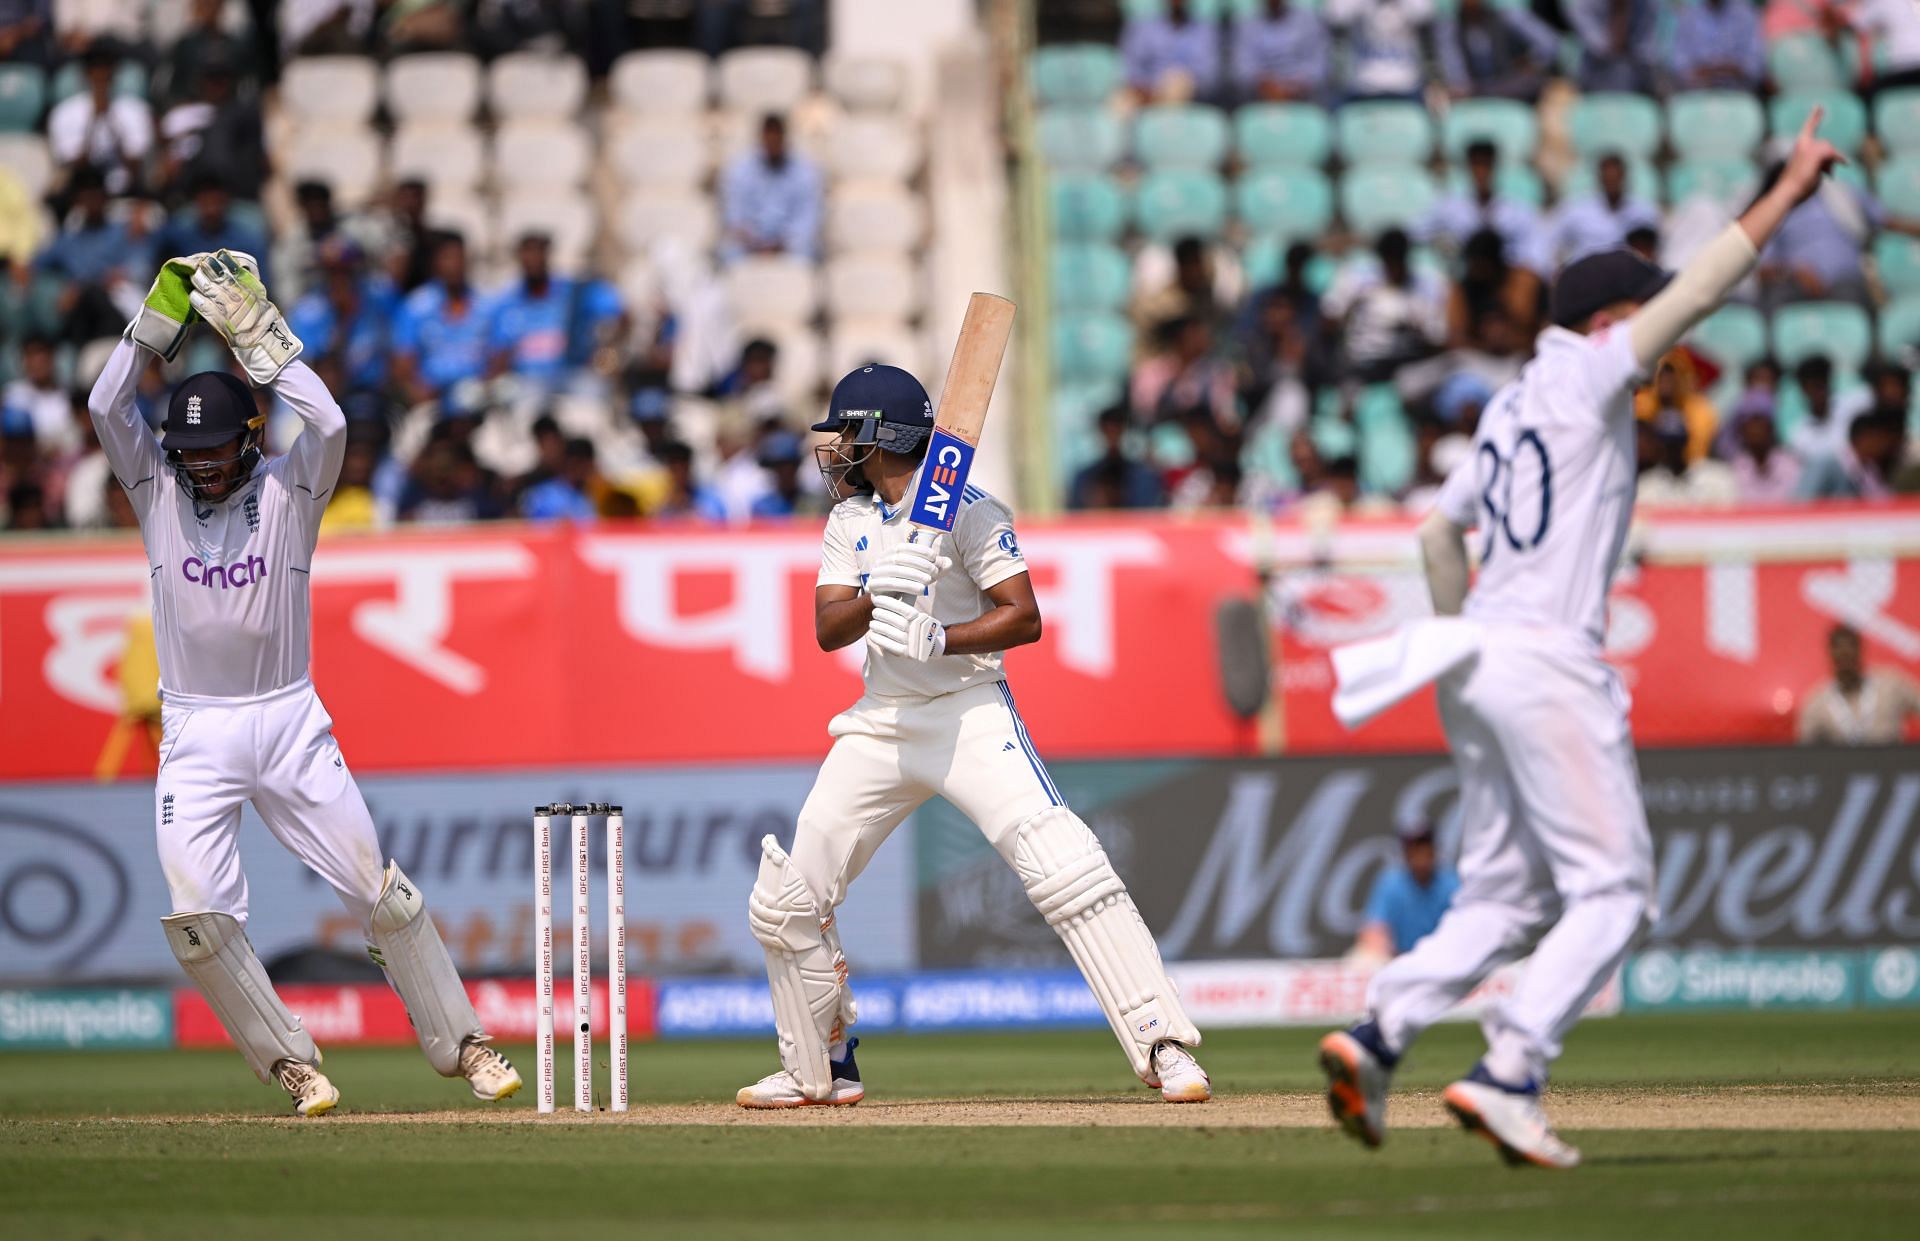 The Indian batters have struggled against the England spinners. [P/C: Getty]